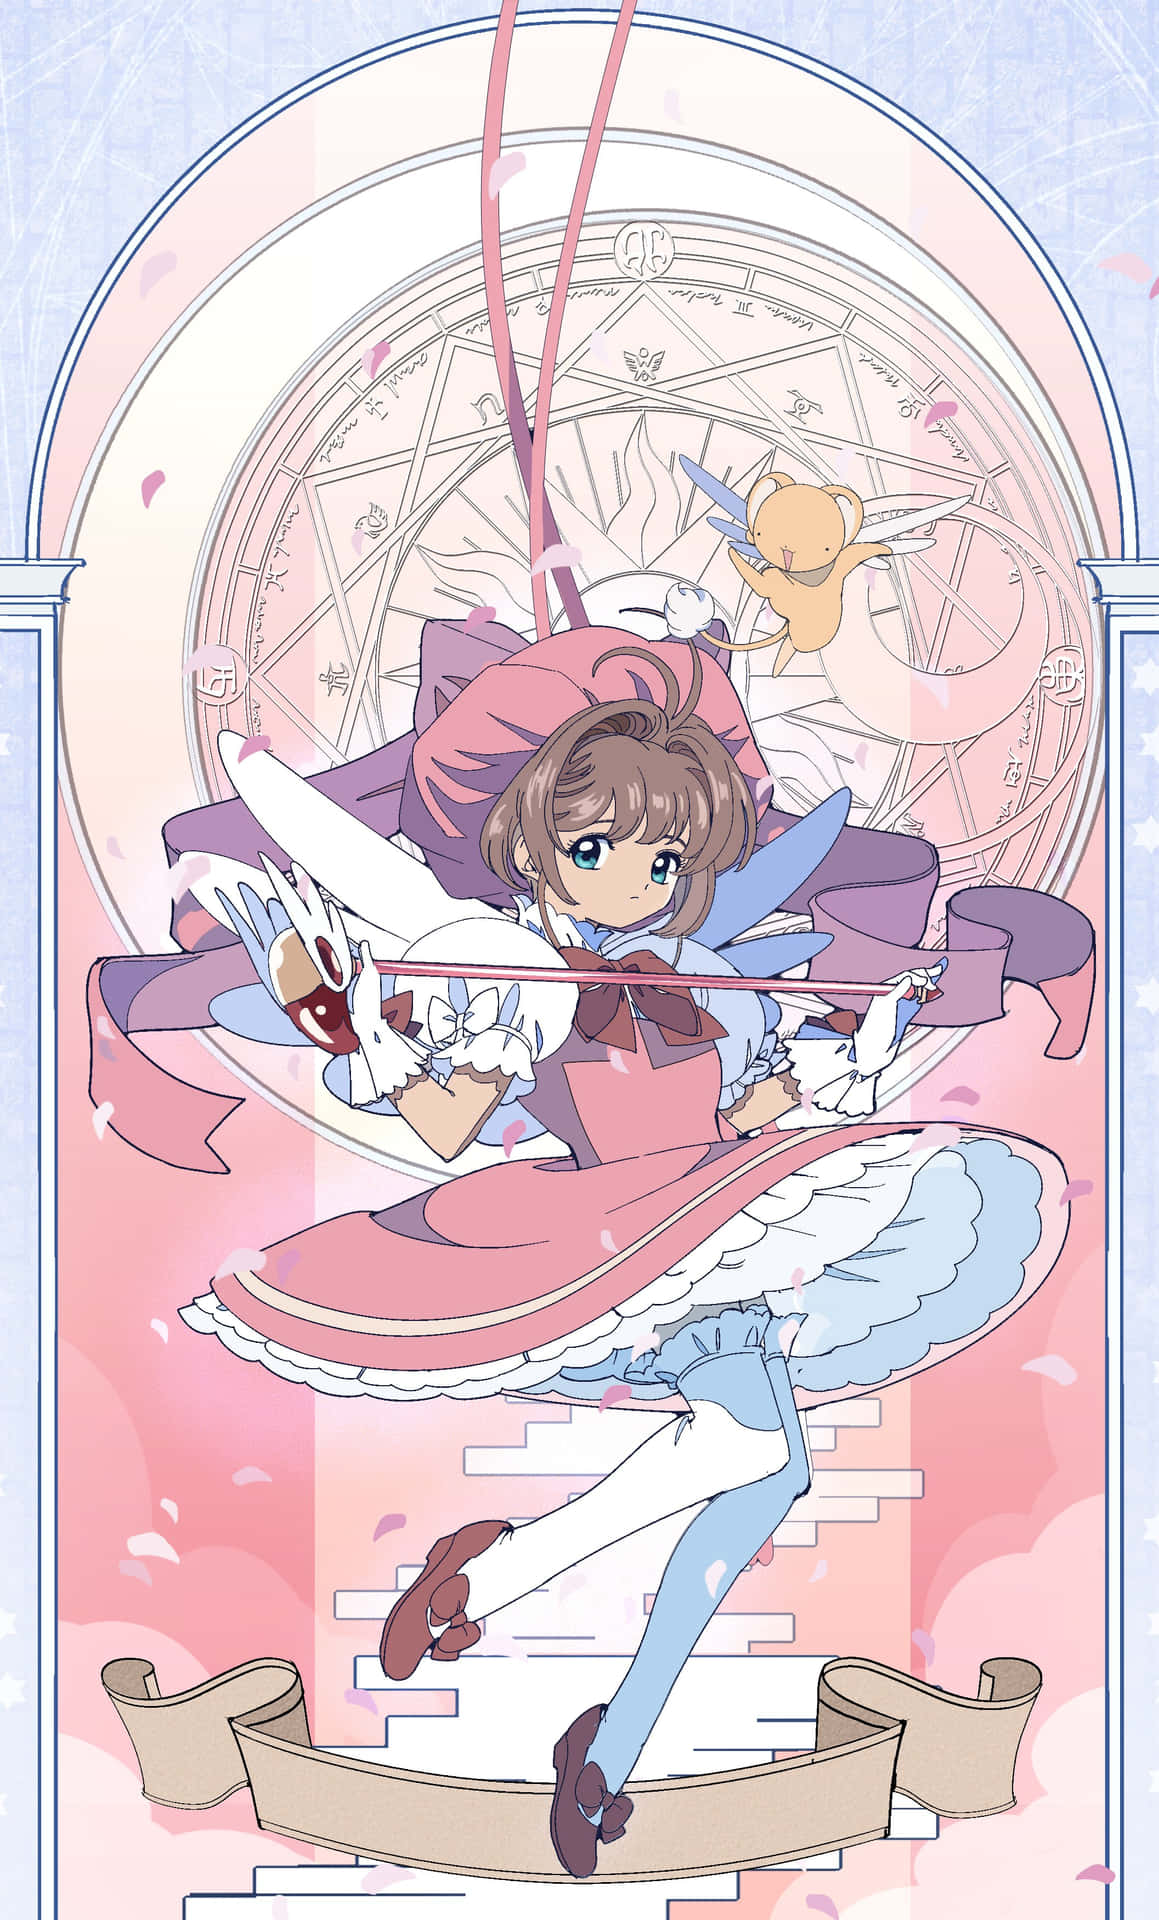 A young but powerful Cardcaptor, Sakura, ready to defeat her foes.